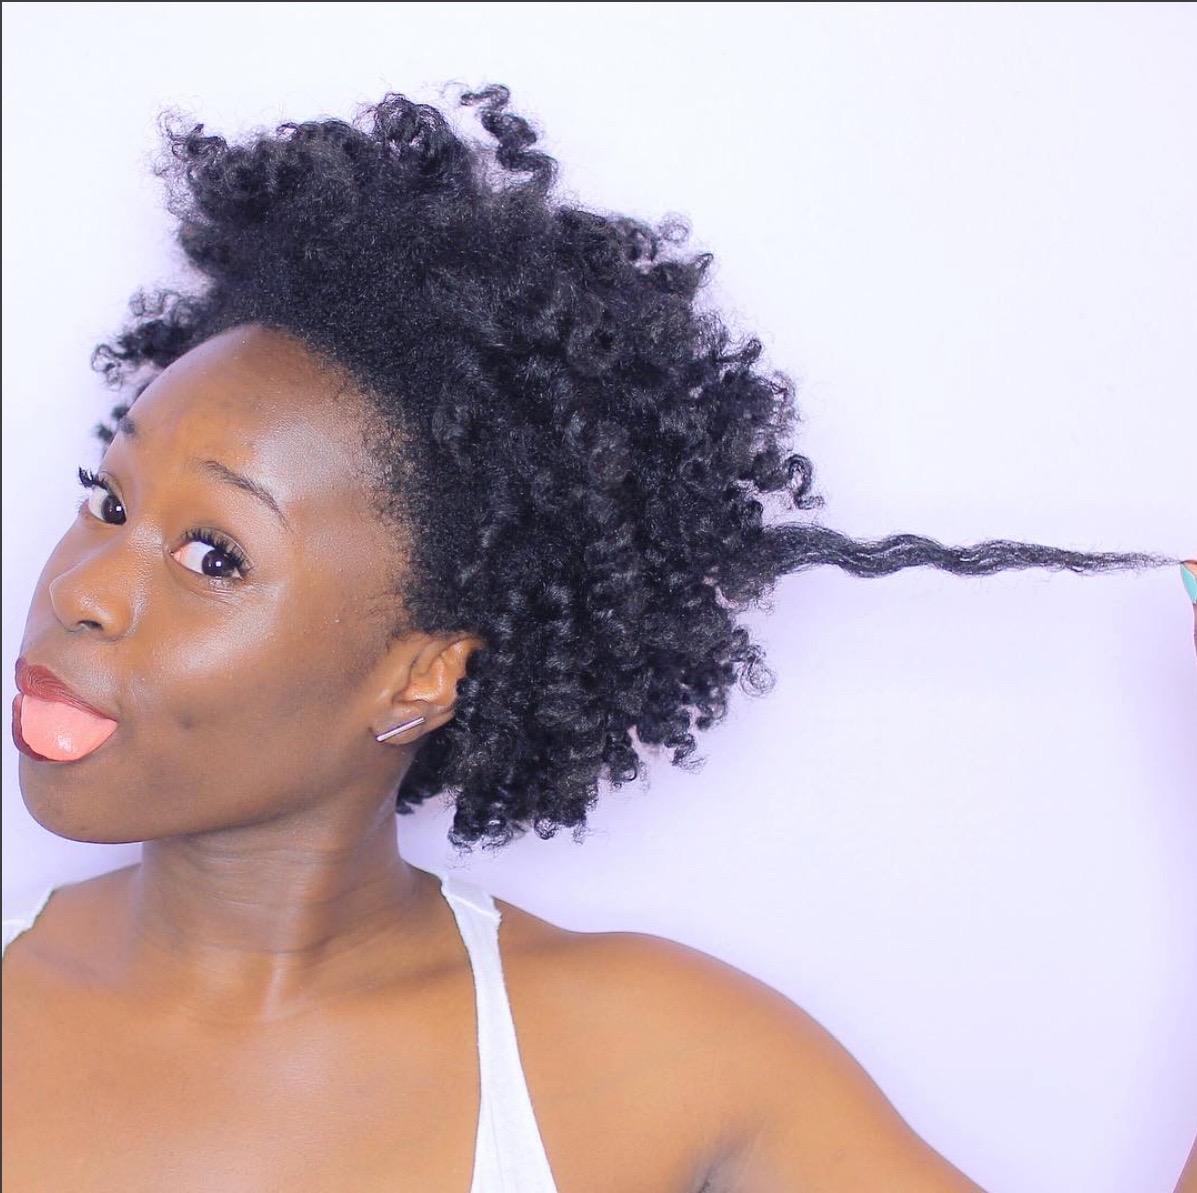 30 Minute Wash Day For Type 4c Natural Hair CurlyNikki